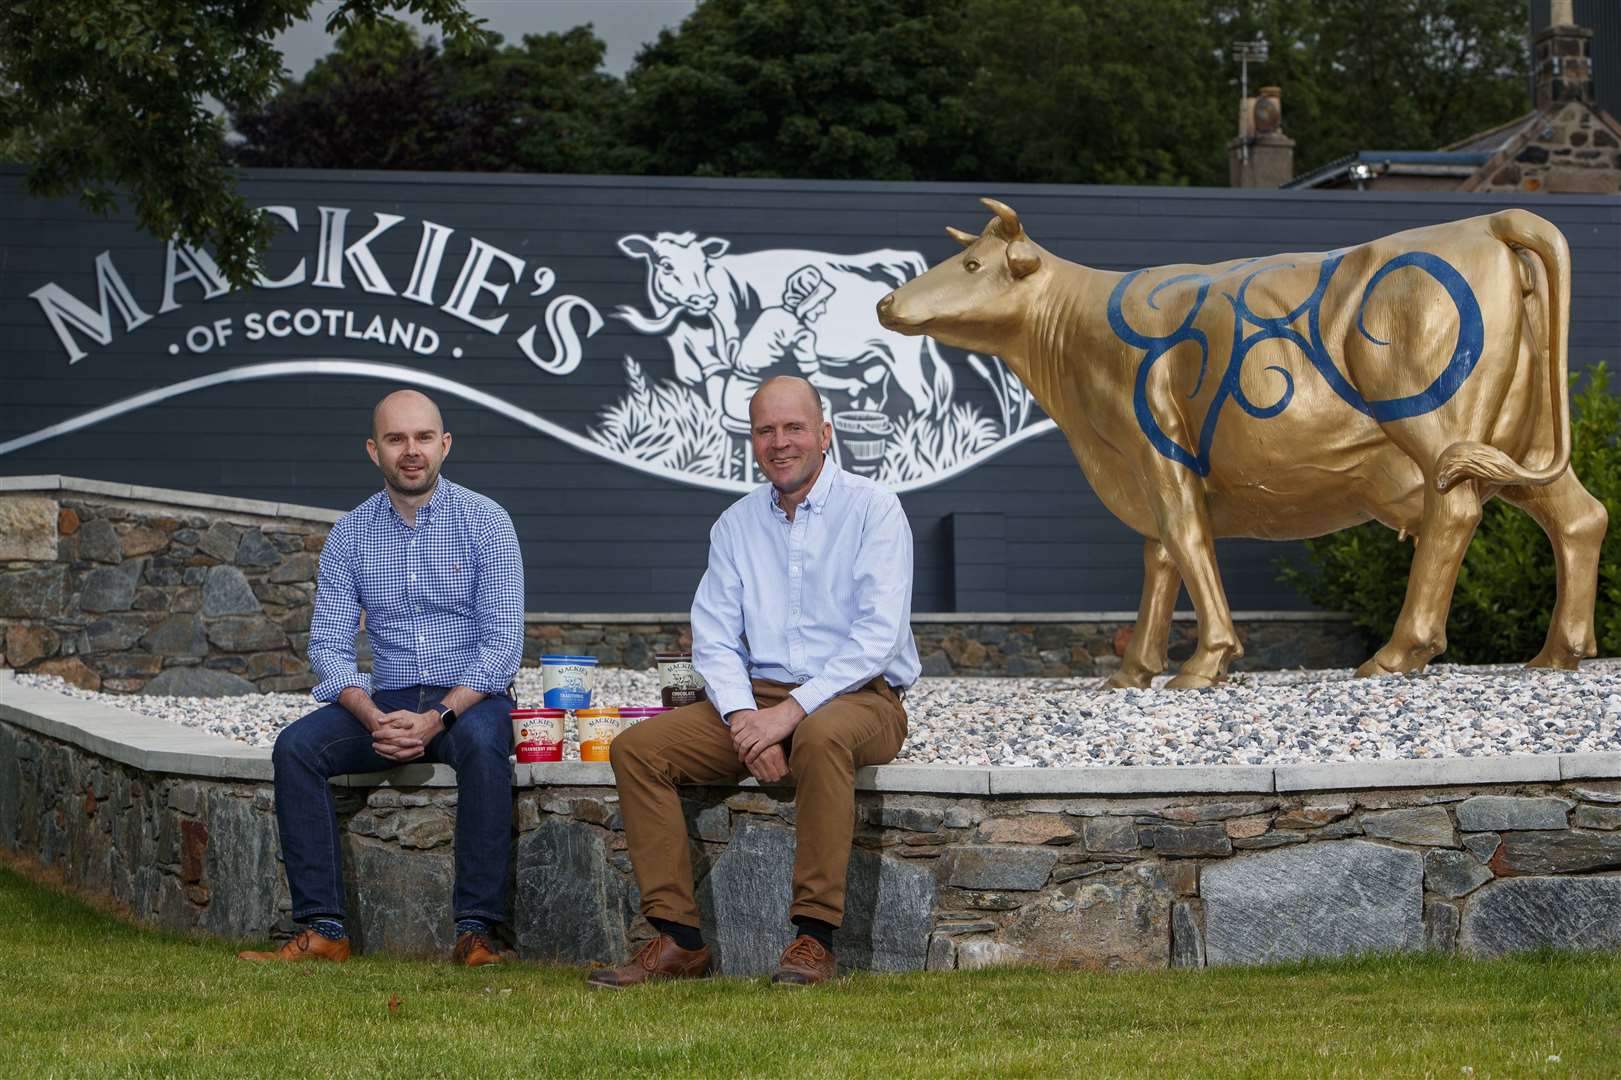 Sales and marketing director at Mackie’s of Scotland, Mac Mackie and chief executive officer at Donald Russell, Kenneth Clow.